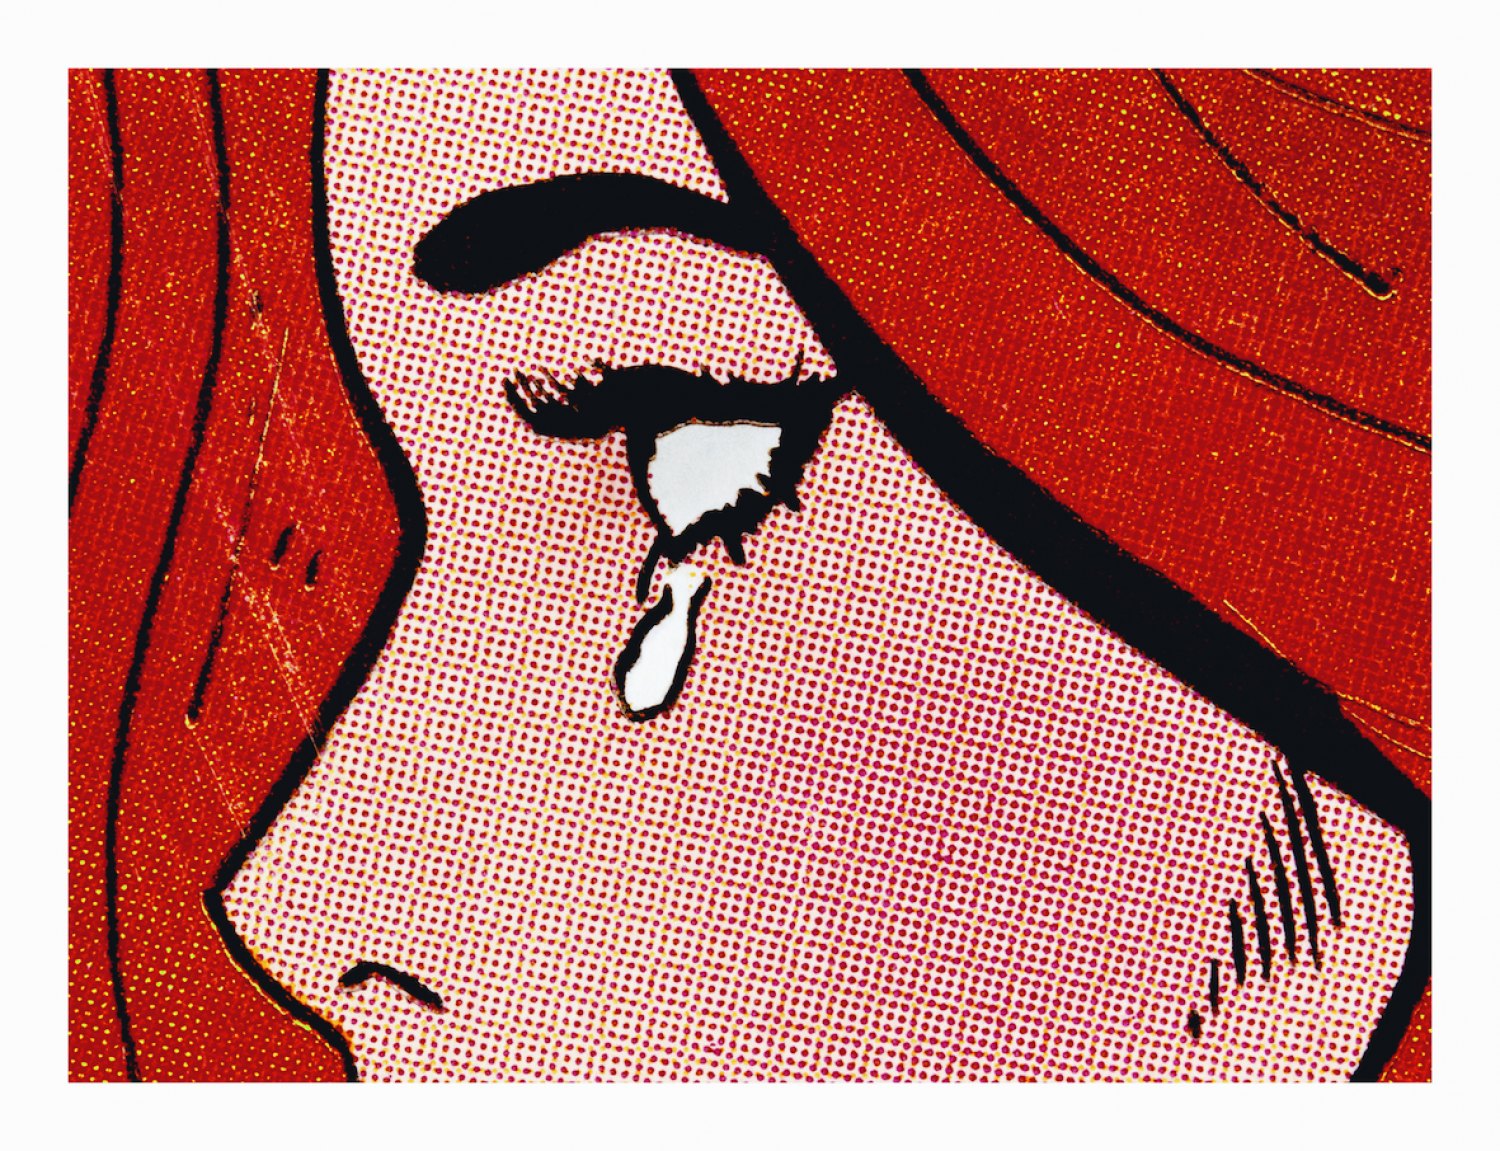 Anne Collier Woman Crying (Comic) #19, 2019 126 x 166 (cm)